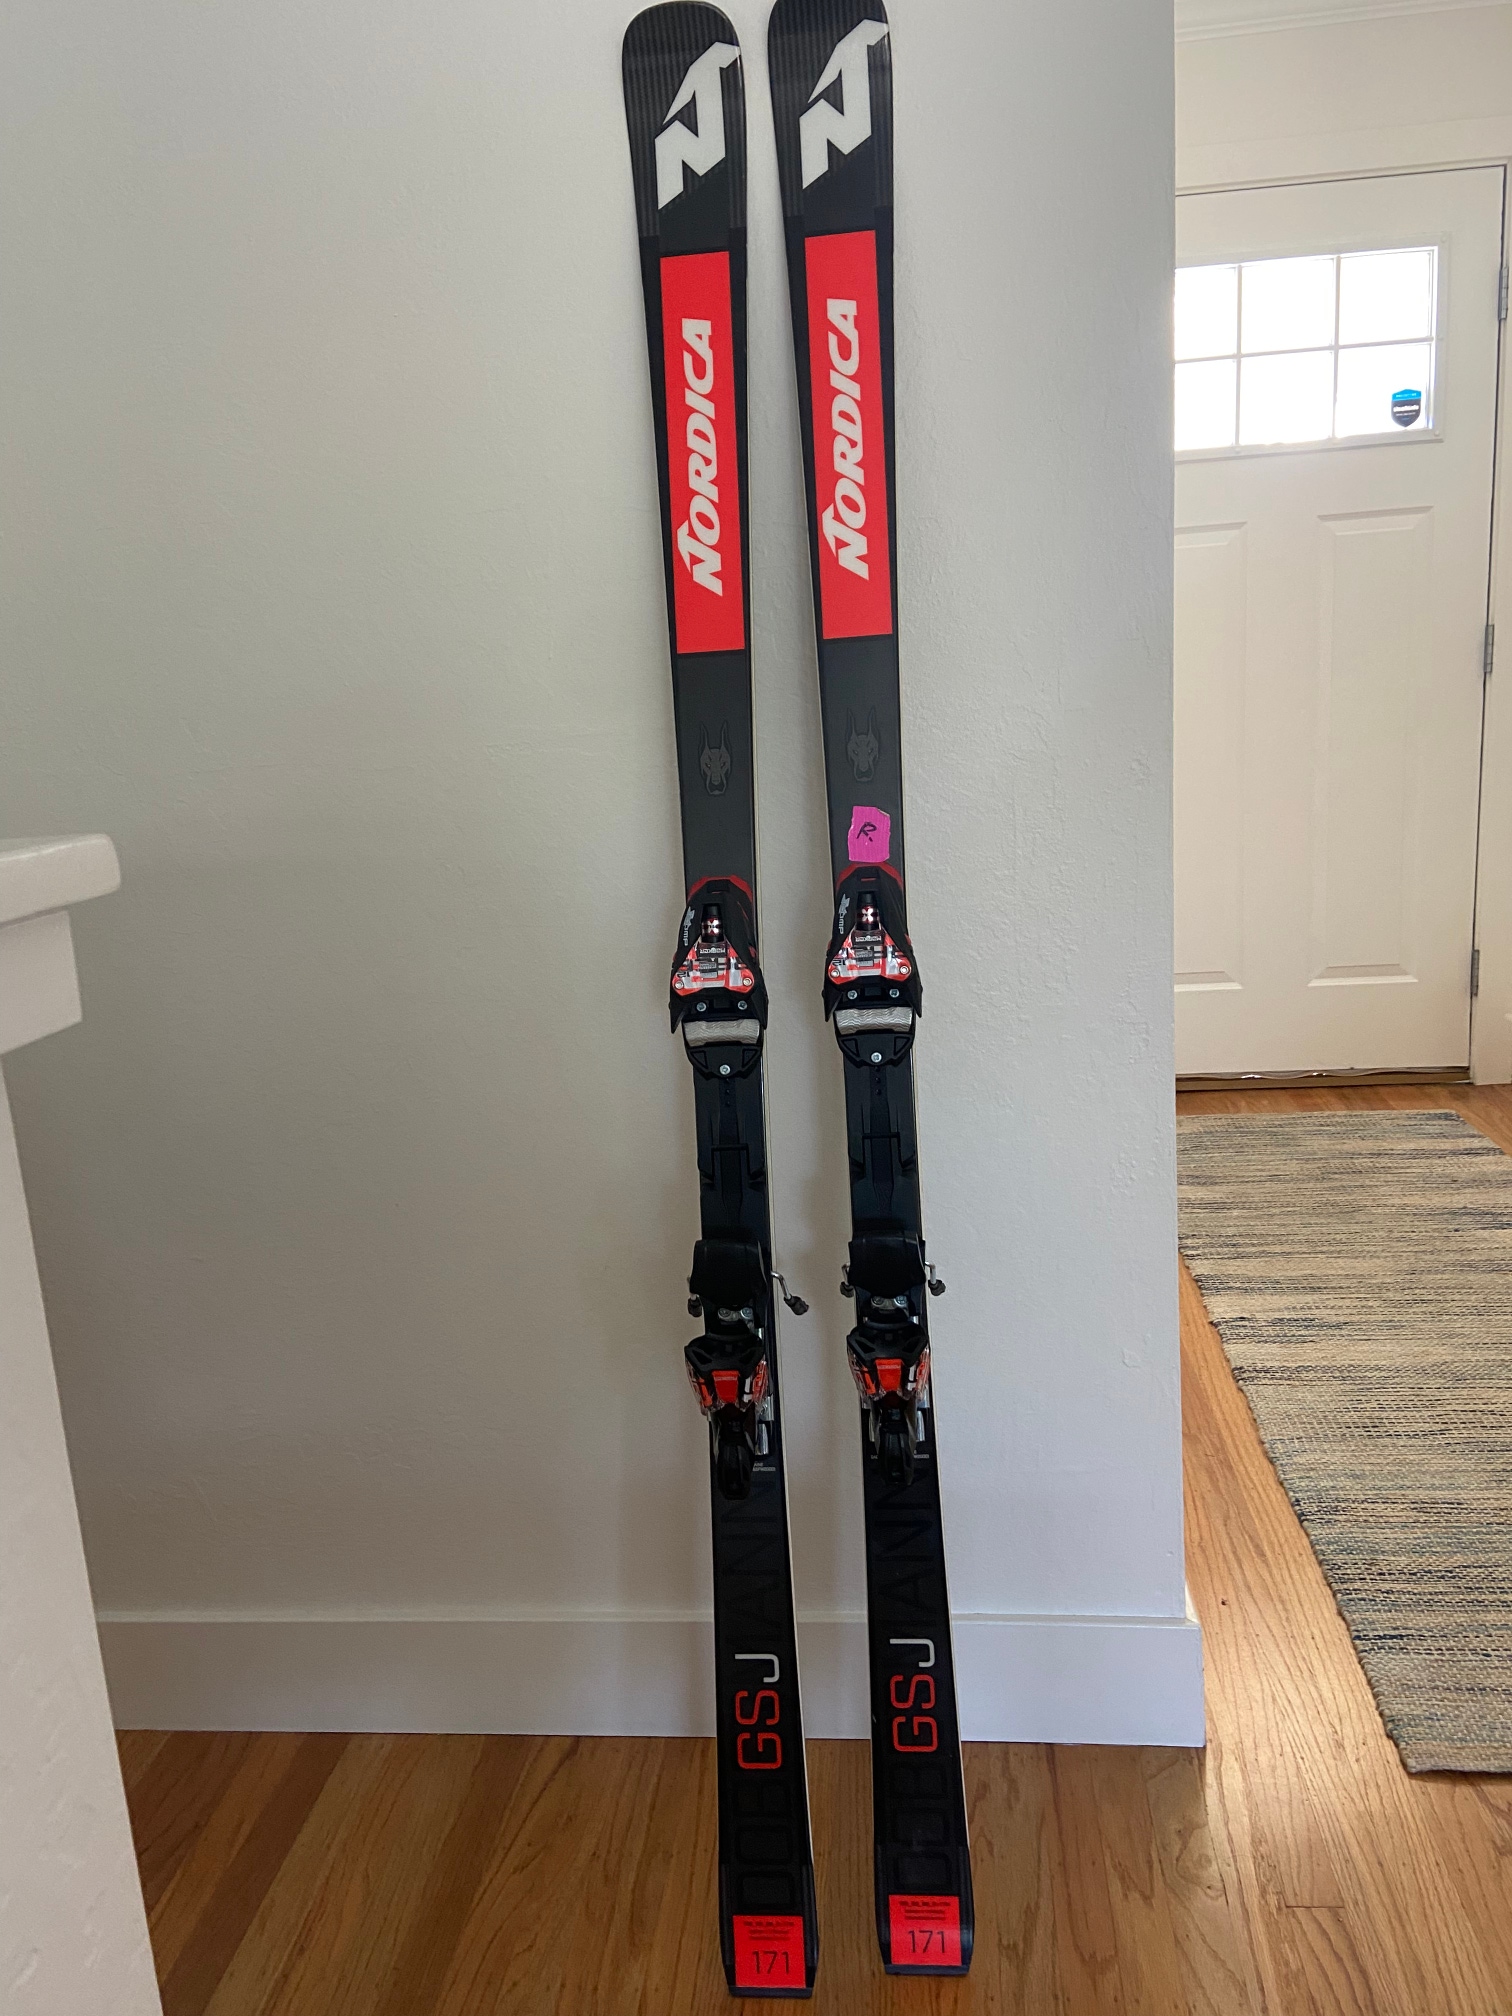 TWO PAIR - Nordica 171 Dobermann GSJ Skis With Marker XComp 12 Bindings - RACERS & TRAINERS